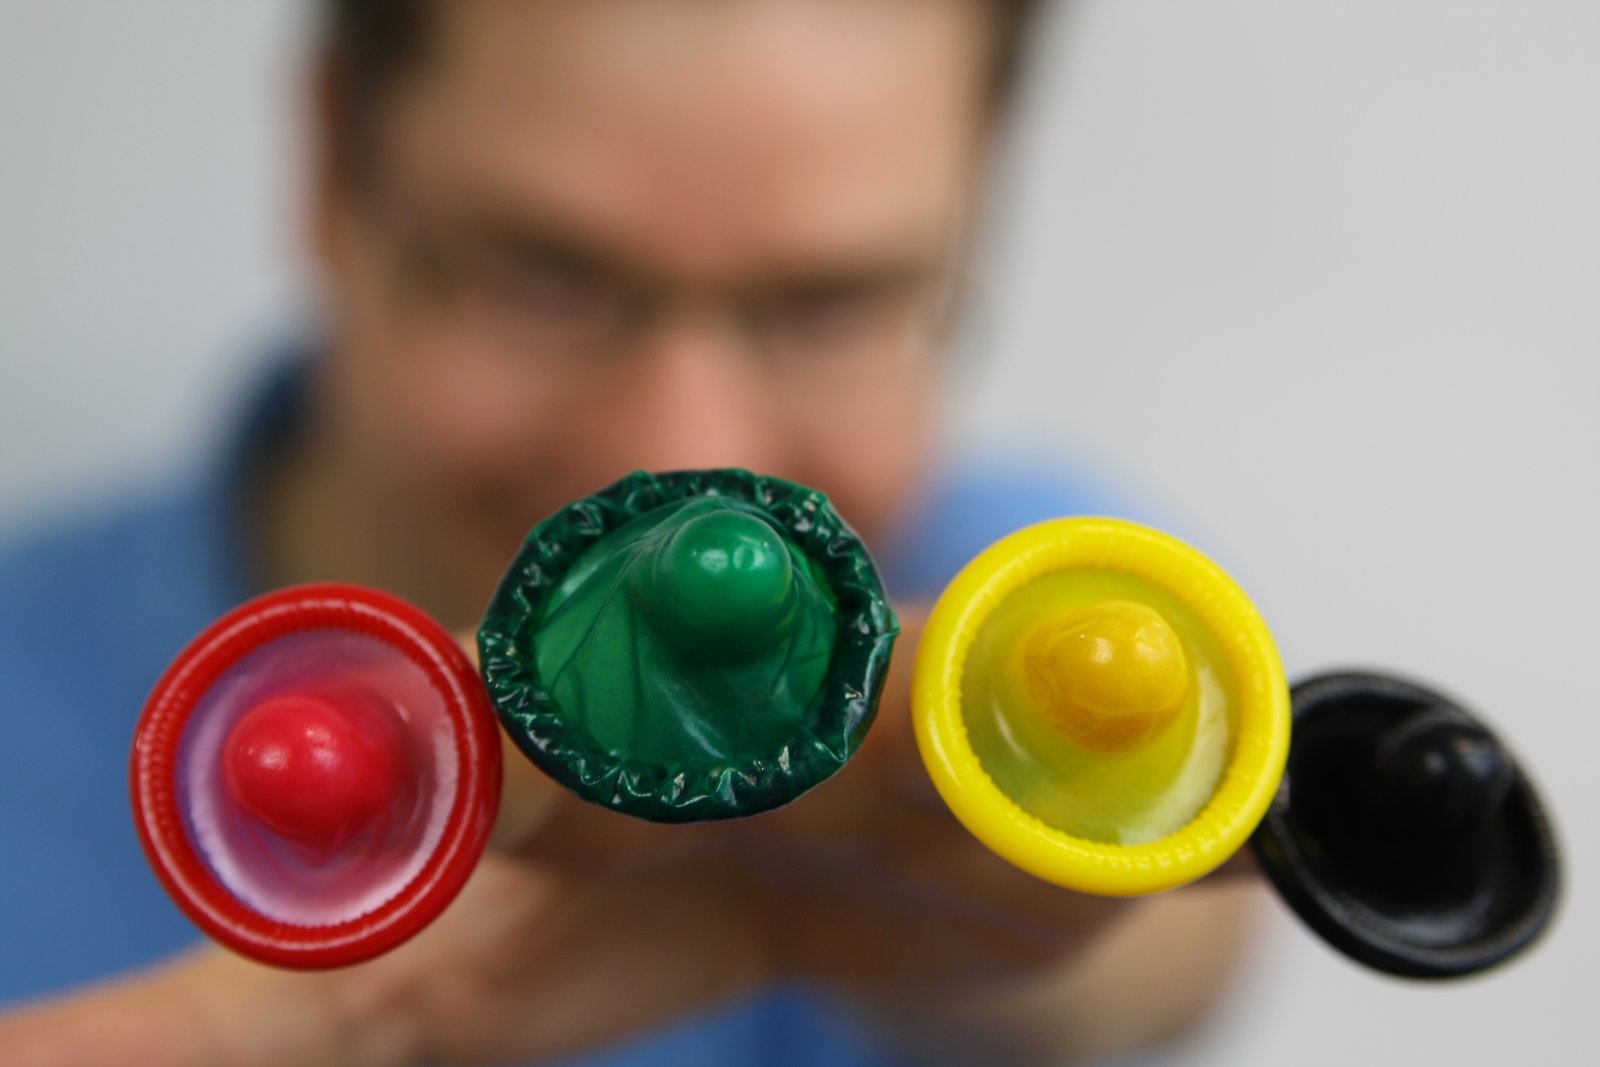 Jan Vinzenz Krause with colorful condoms in red, green, yellow and black